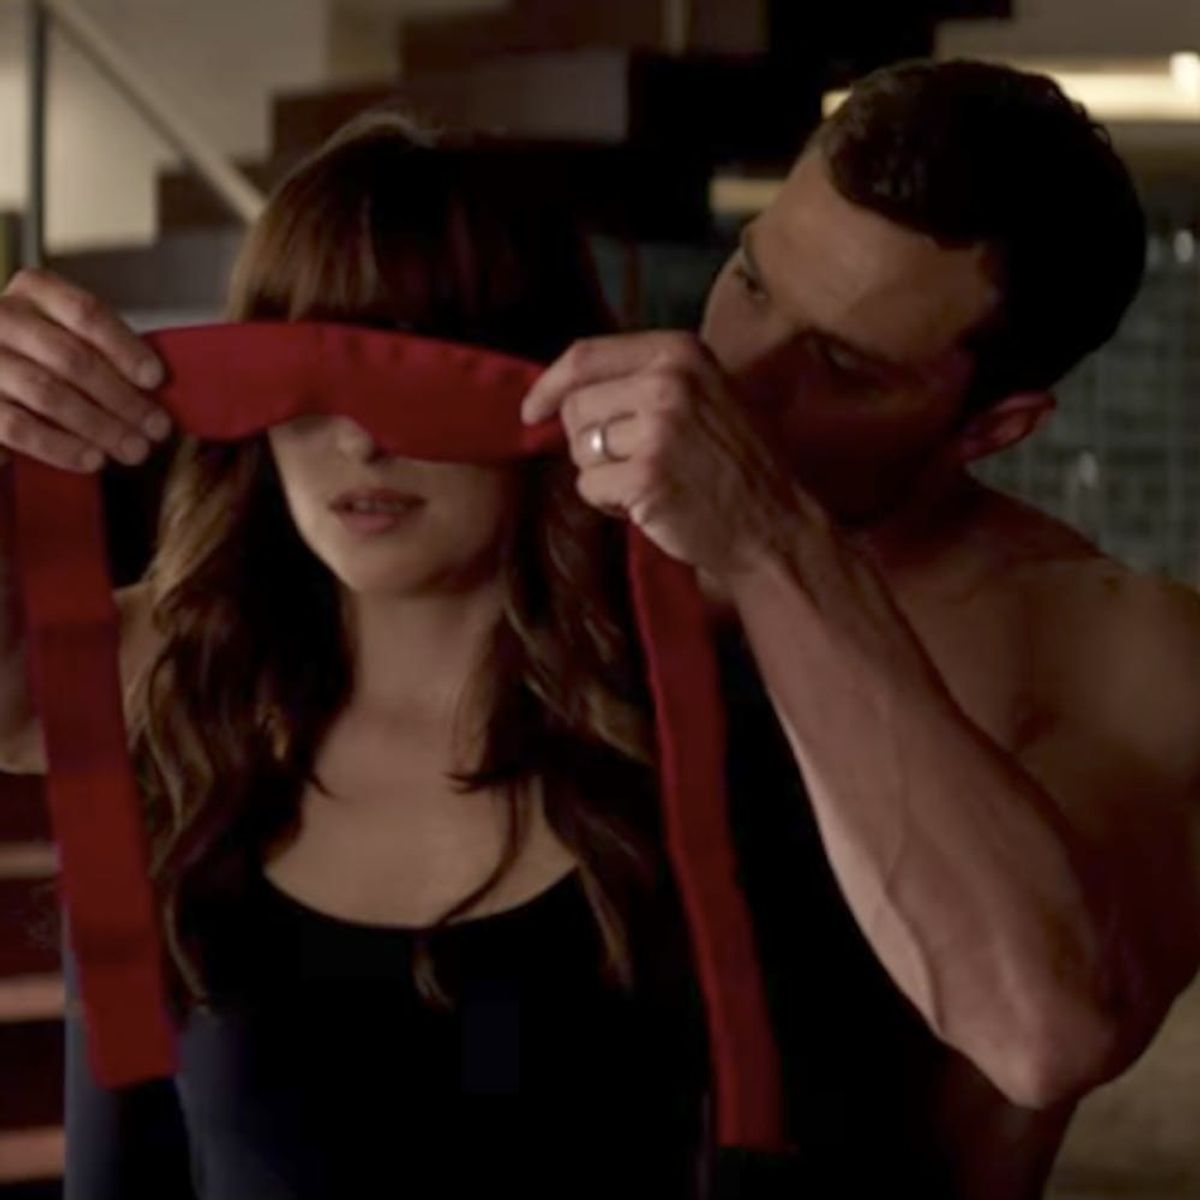 The New “Fifty Shades Freed” Trailer Is Here and It’s a Total Nail-Biter